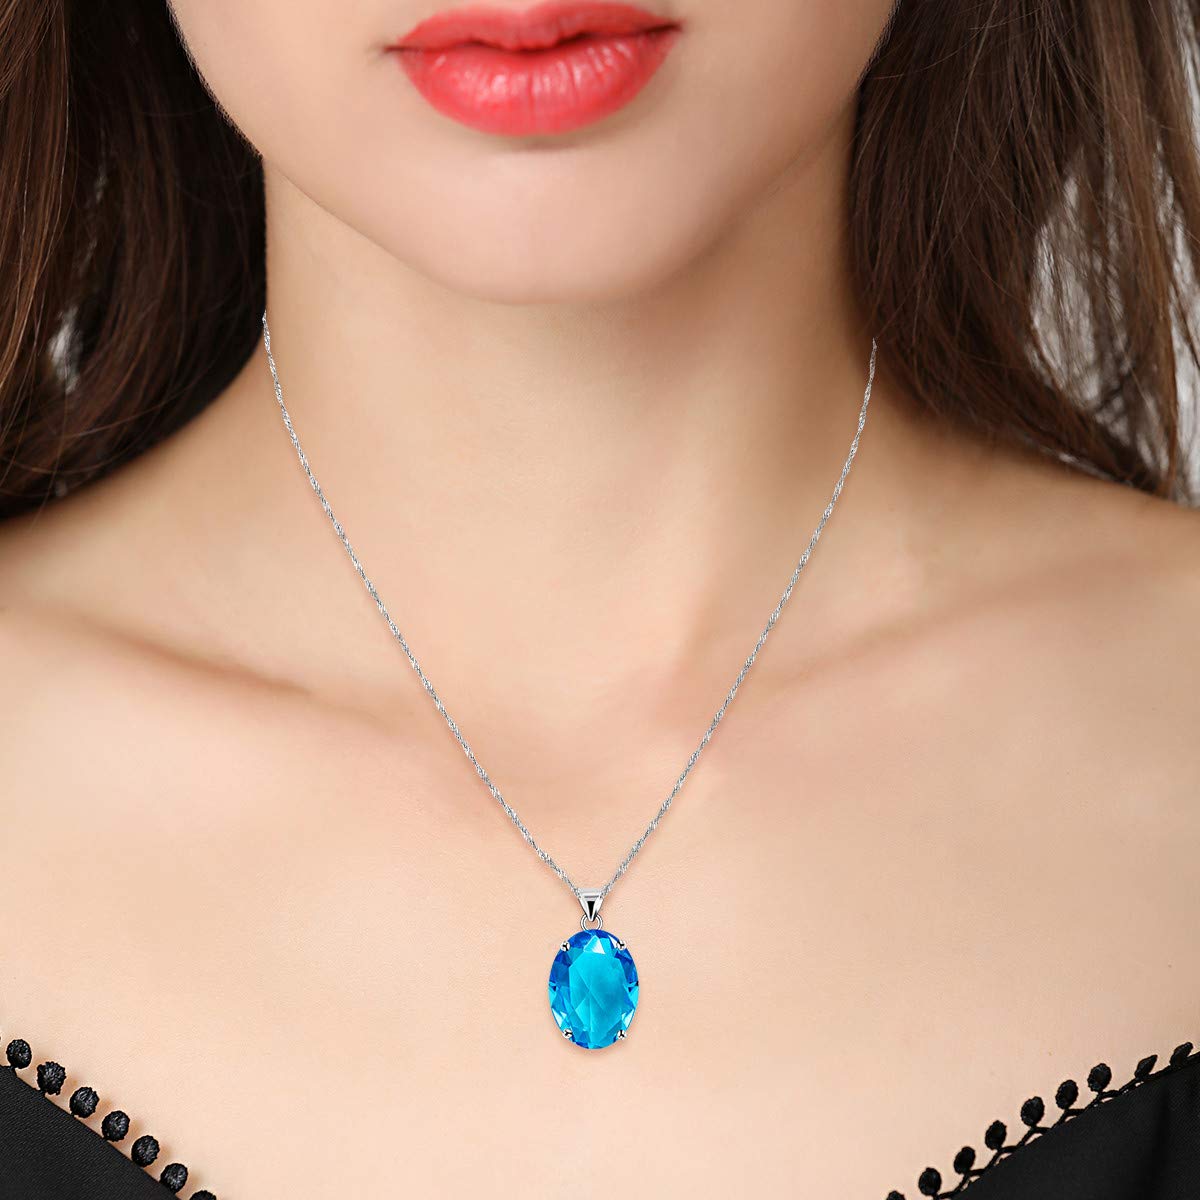 Uloveido Platinum Plated Blue Cubic Zirconia Solitaire Oval Pendant Necklace Birthstone Wedding Party Jewelry for Women Girls Y892